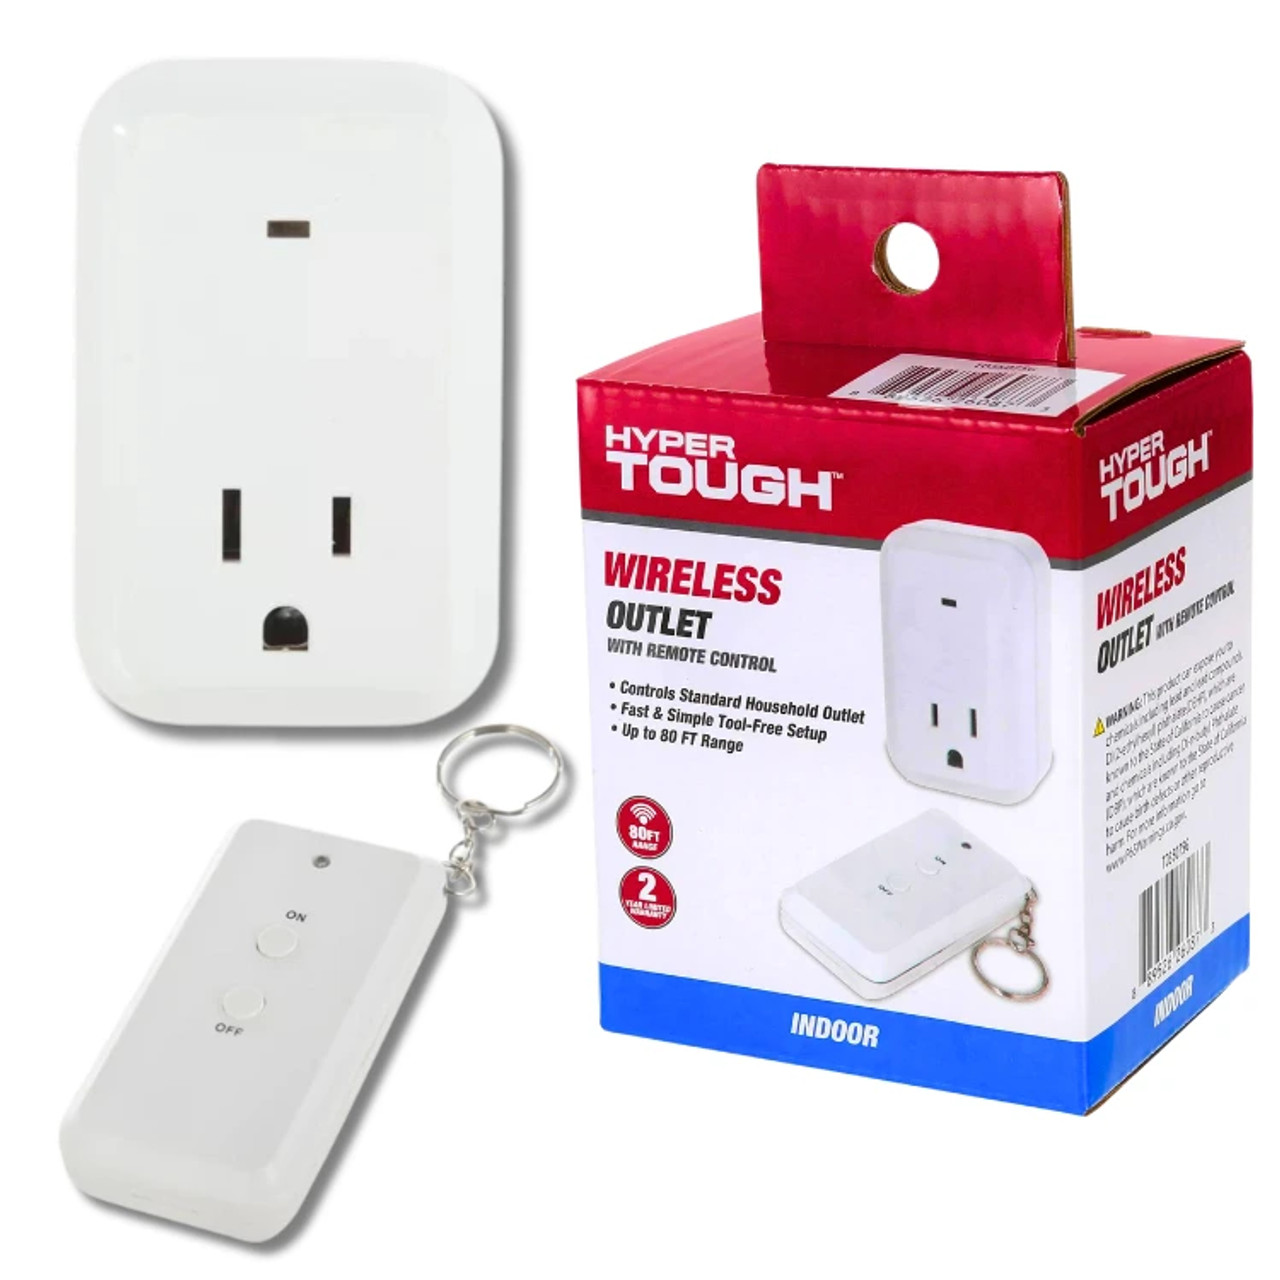 https://cdn11.bigcommerce.com/s-g34rj6mm5p/images/stencil/1280x1280/products/51724/26632/Indoor_Remote_Control_Outlet_Wireless_Remote_Light_Switch_1__09914.1694119088.jpg?c=1?imbypass=on